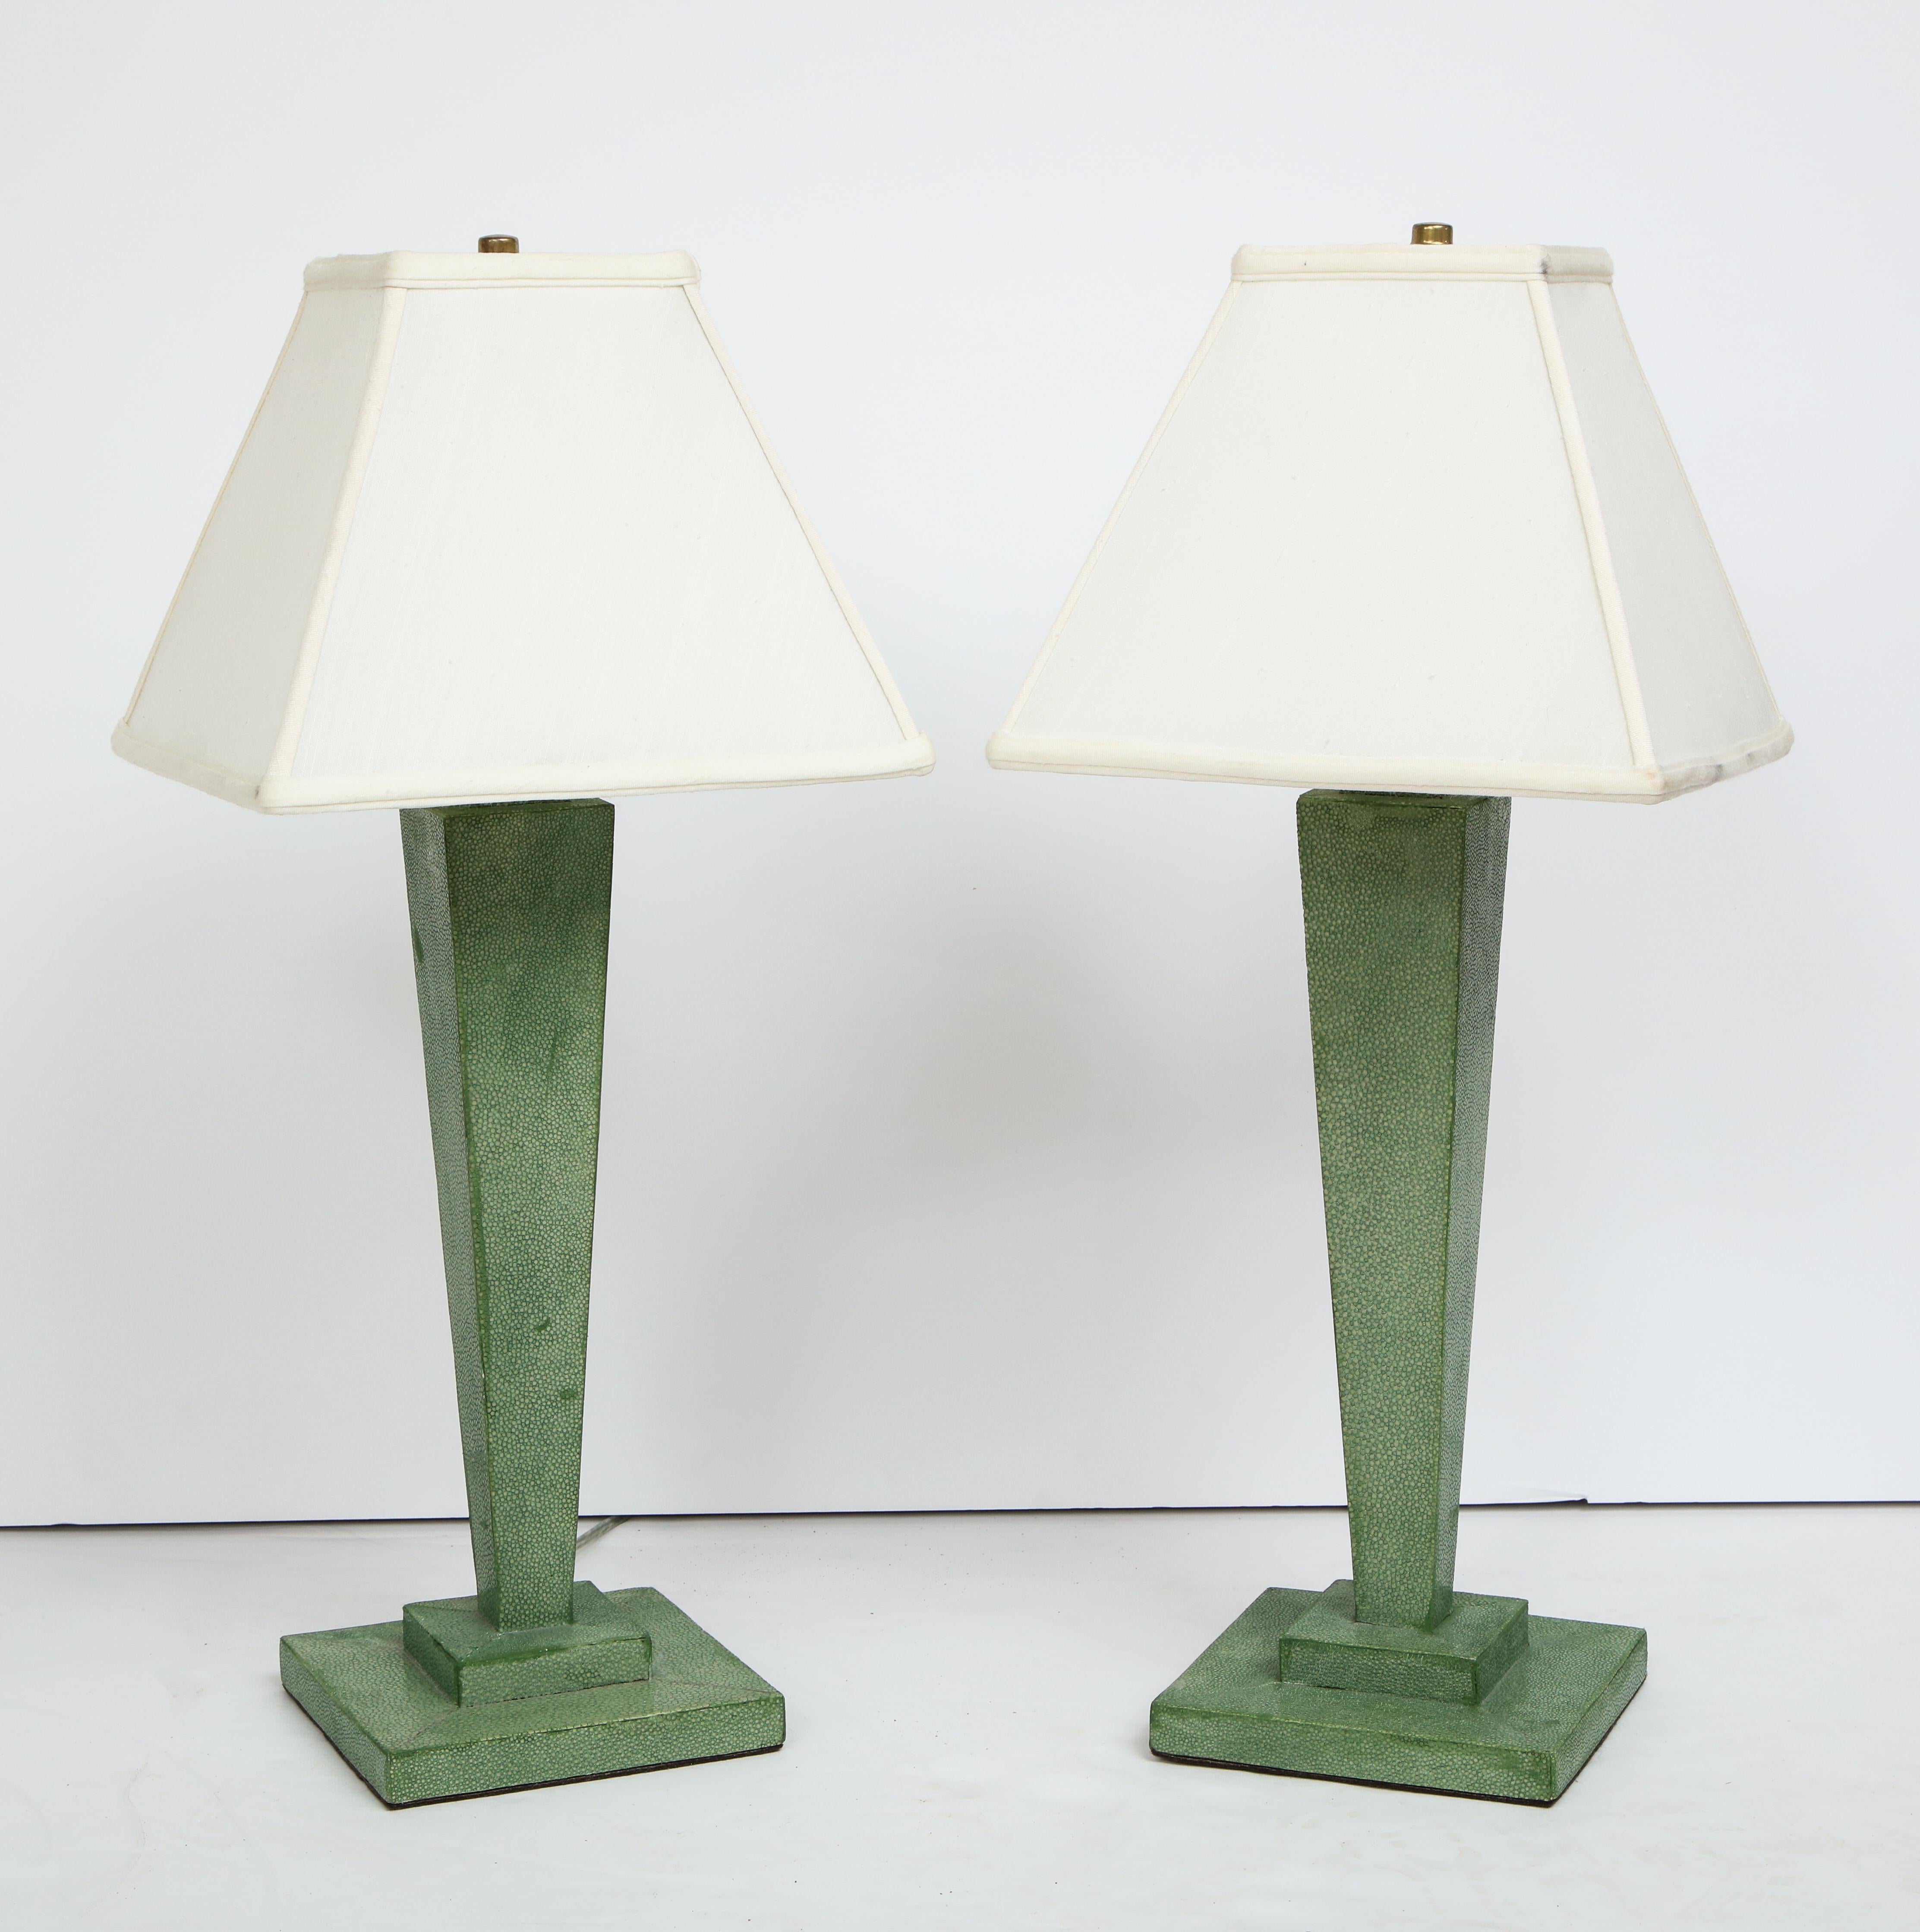 Green shagreen leather covered lamps with ivory silk shades